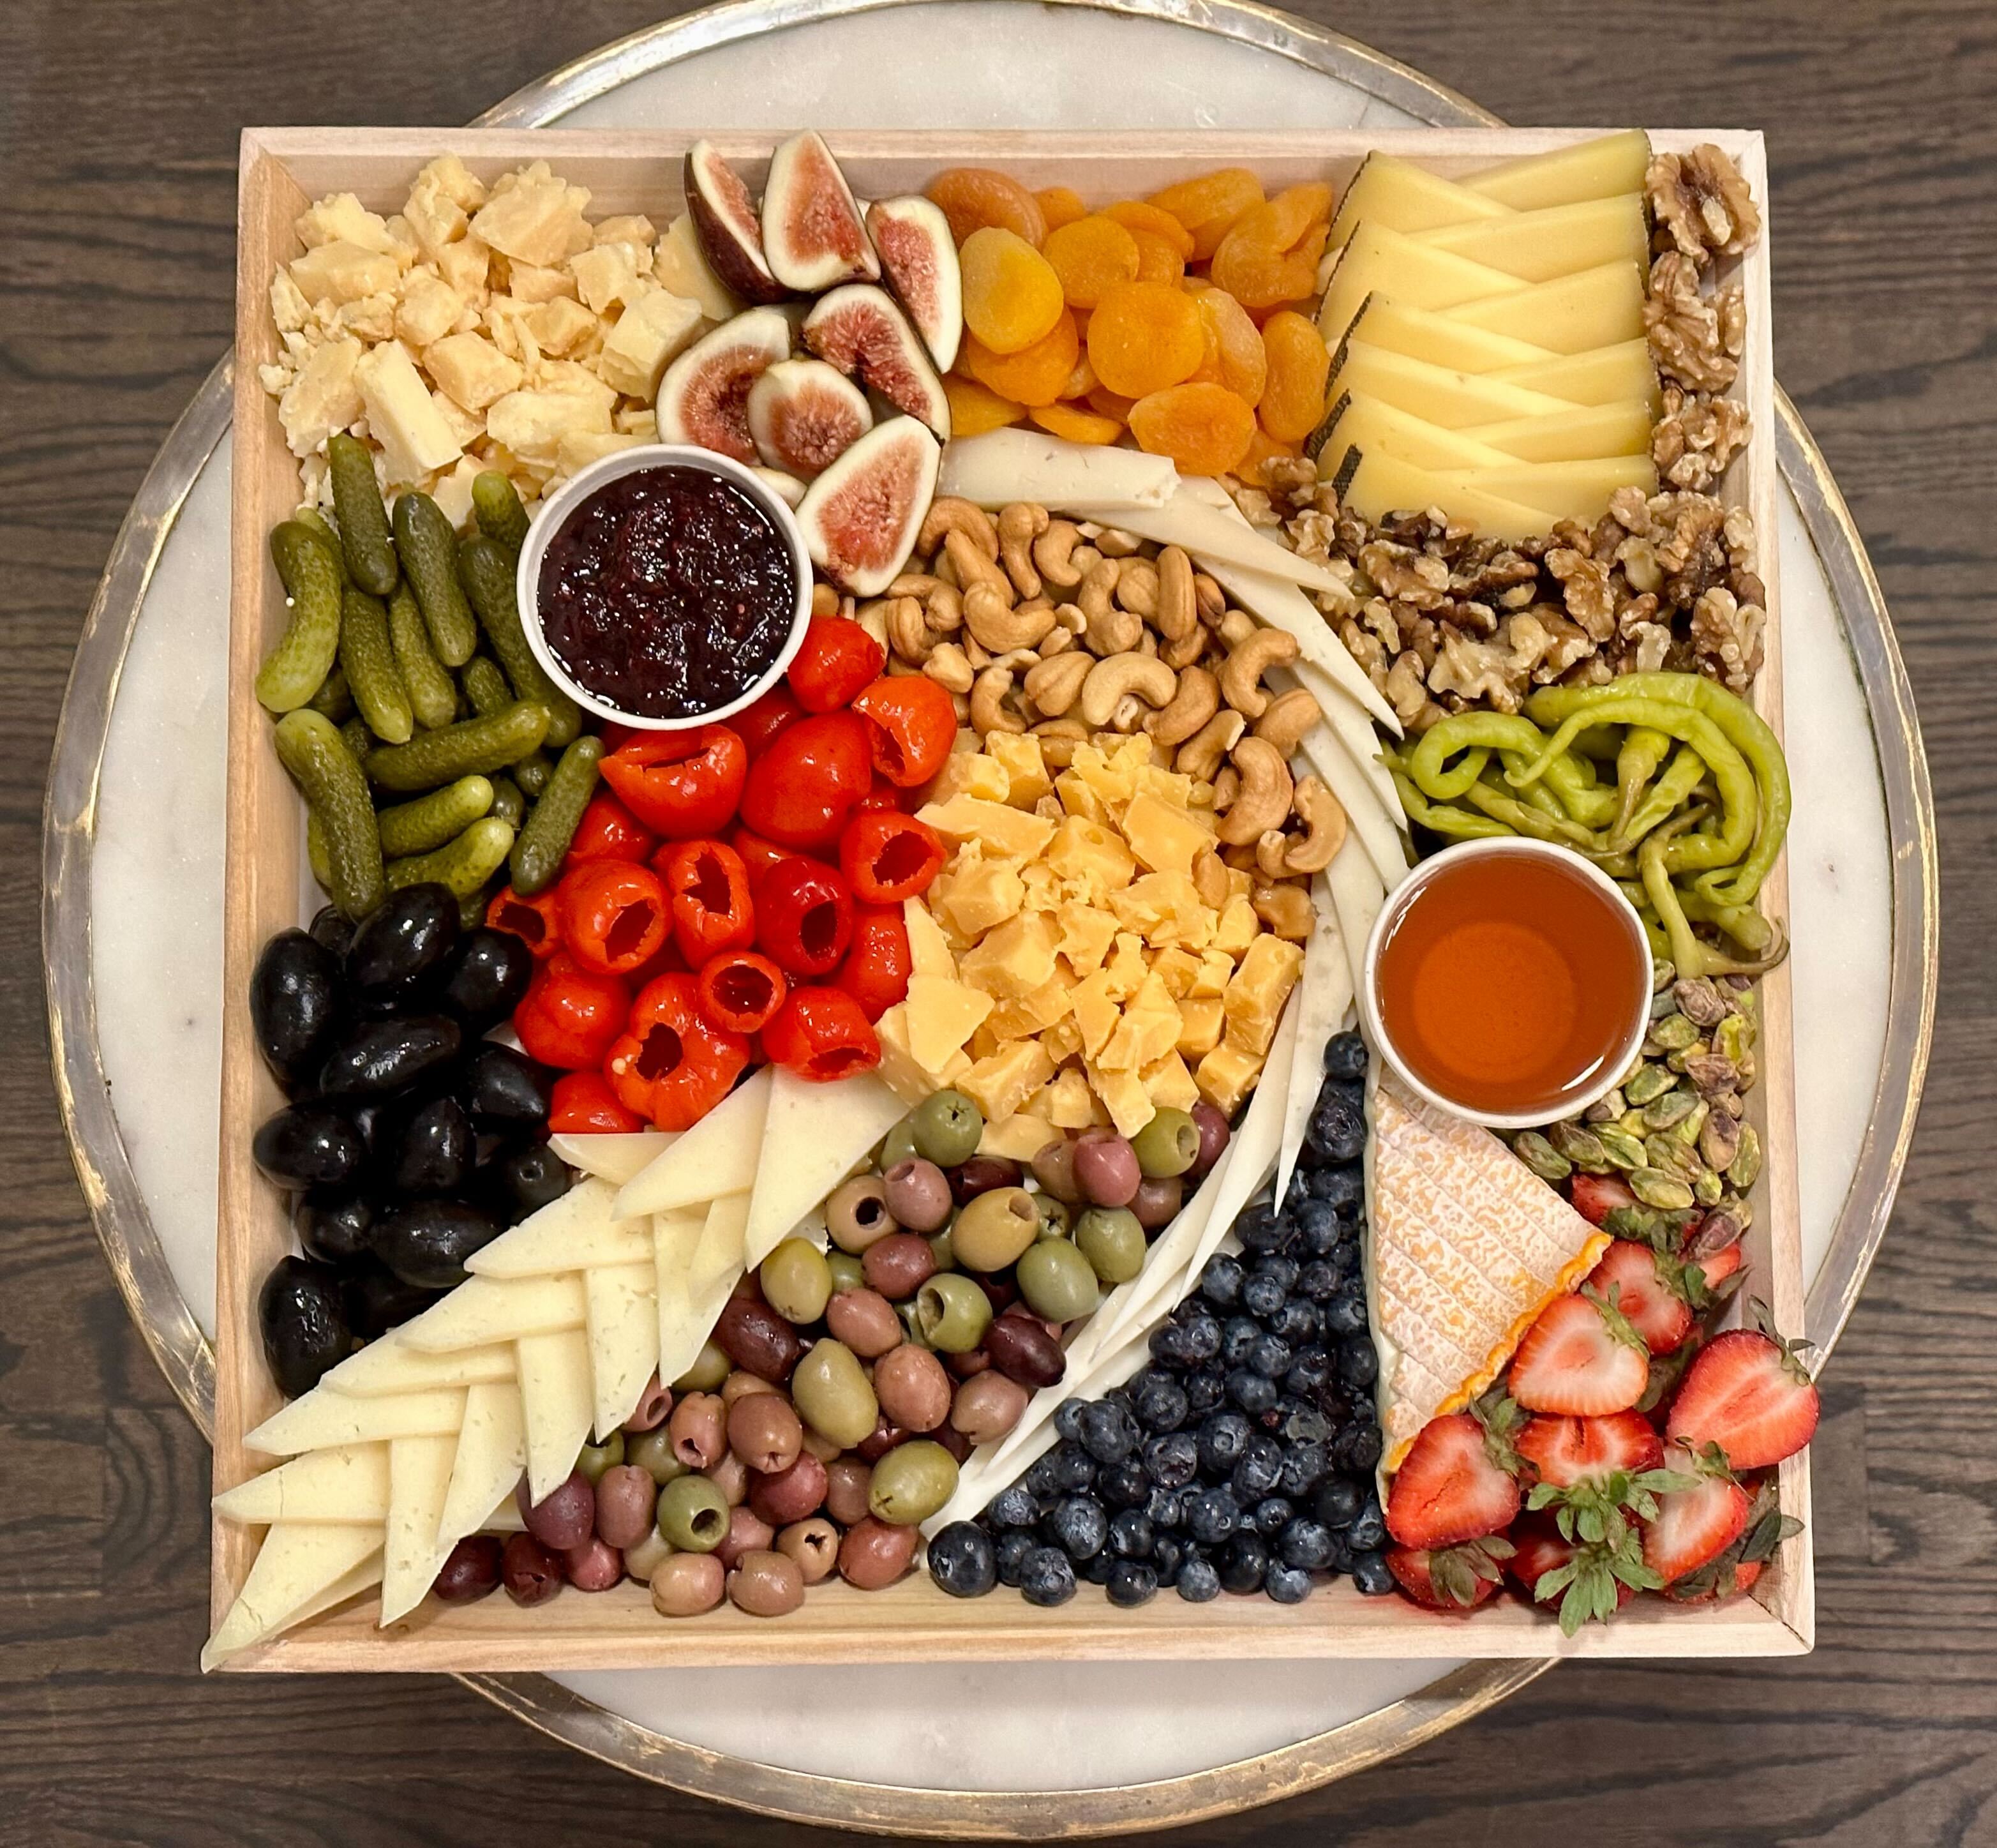 Image of the Farmstead cheese platter.